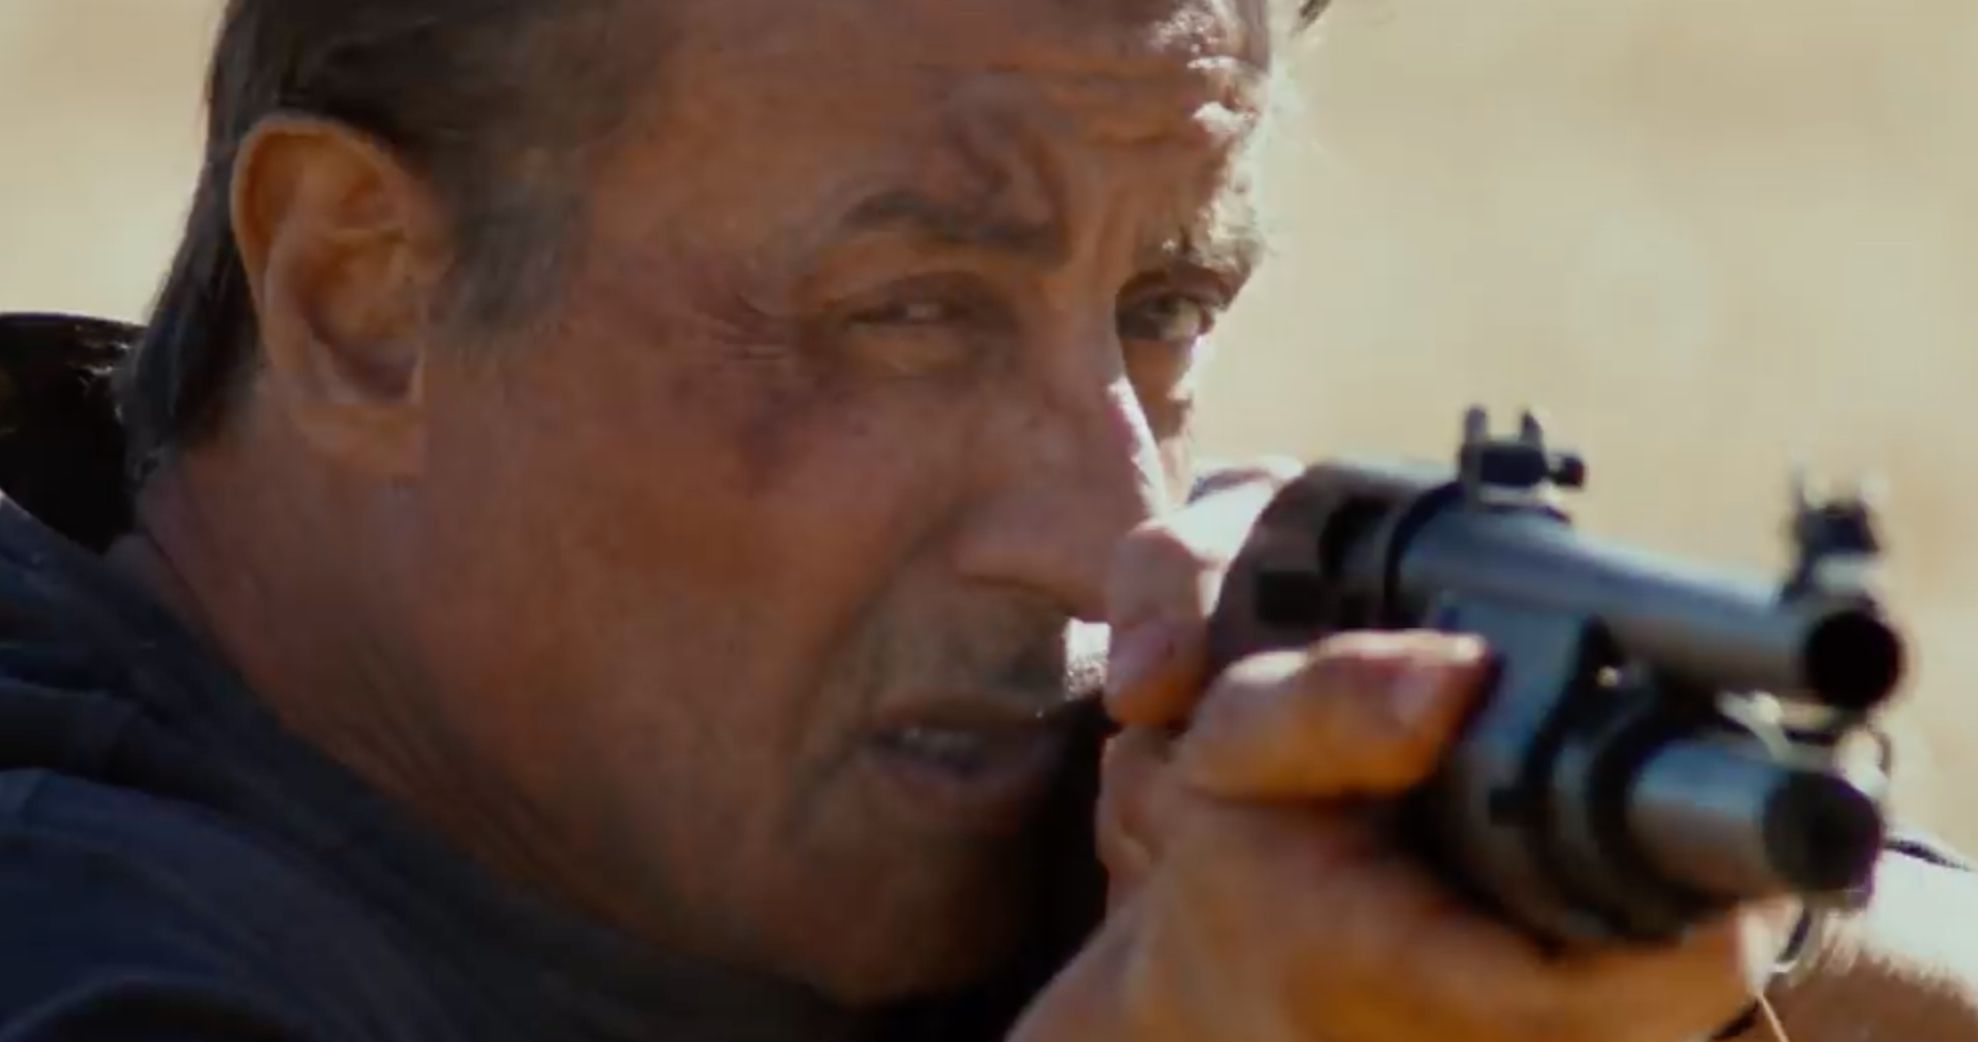 Rambo: Last Blood Trailer Is Here and It's Brutal, Just as It Should Be